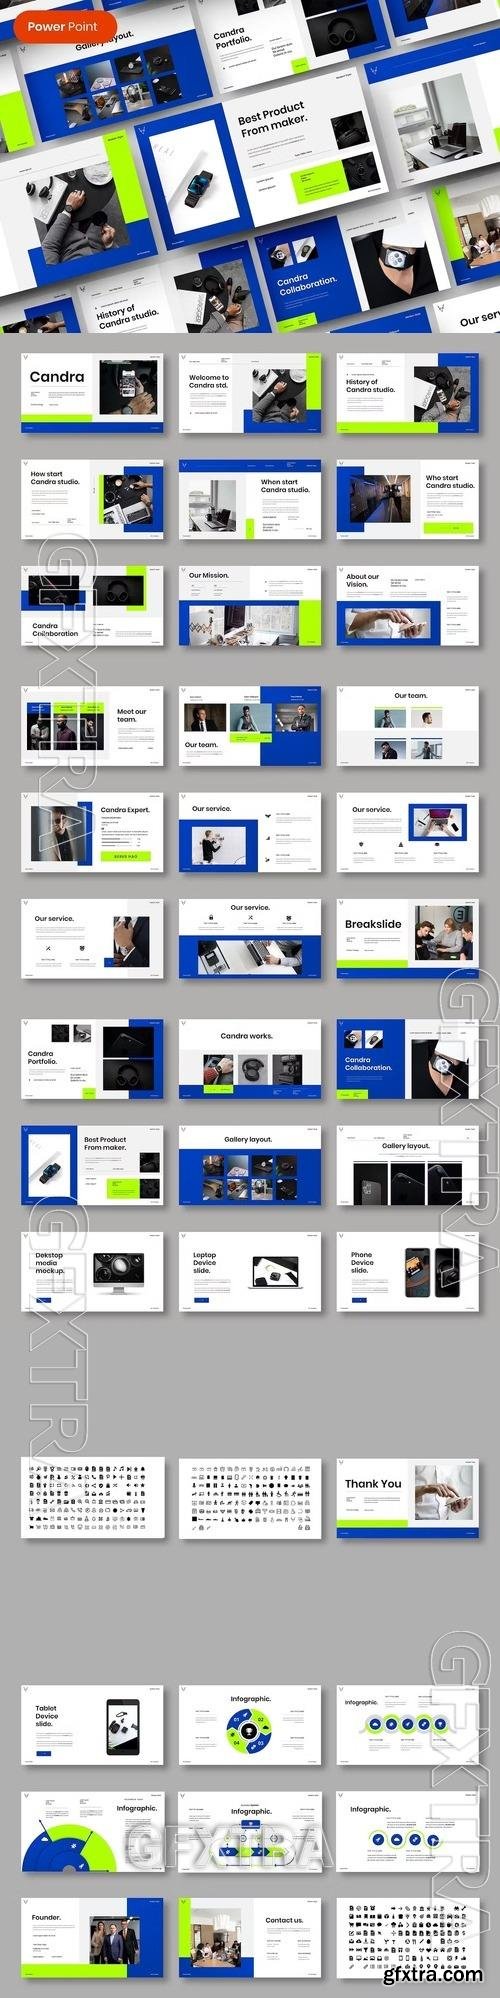 Candra – Business PowerPoint Template 2TNQV2Q